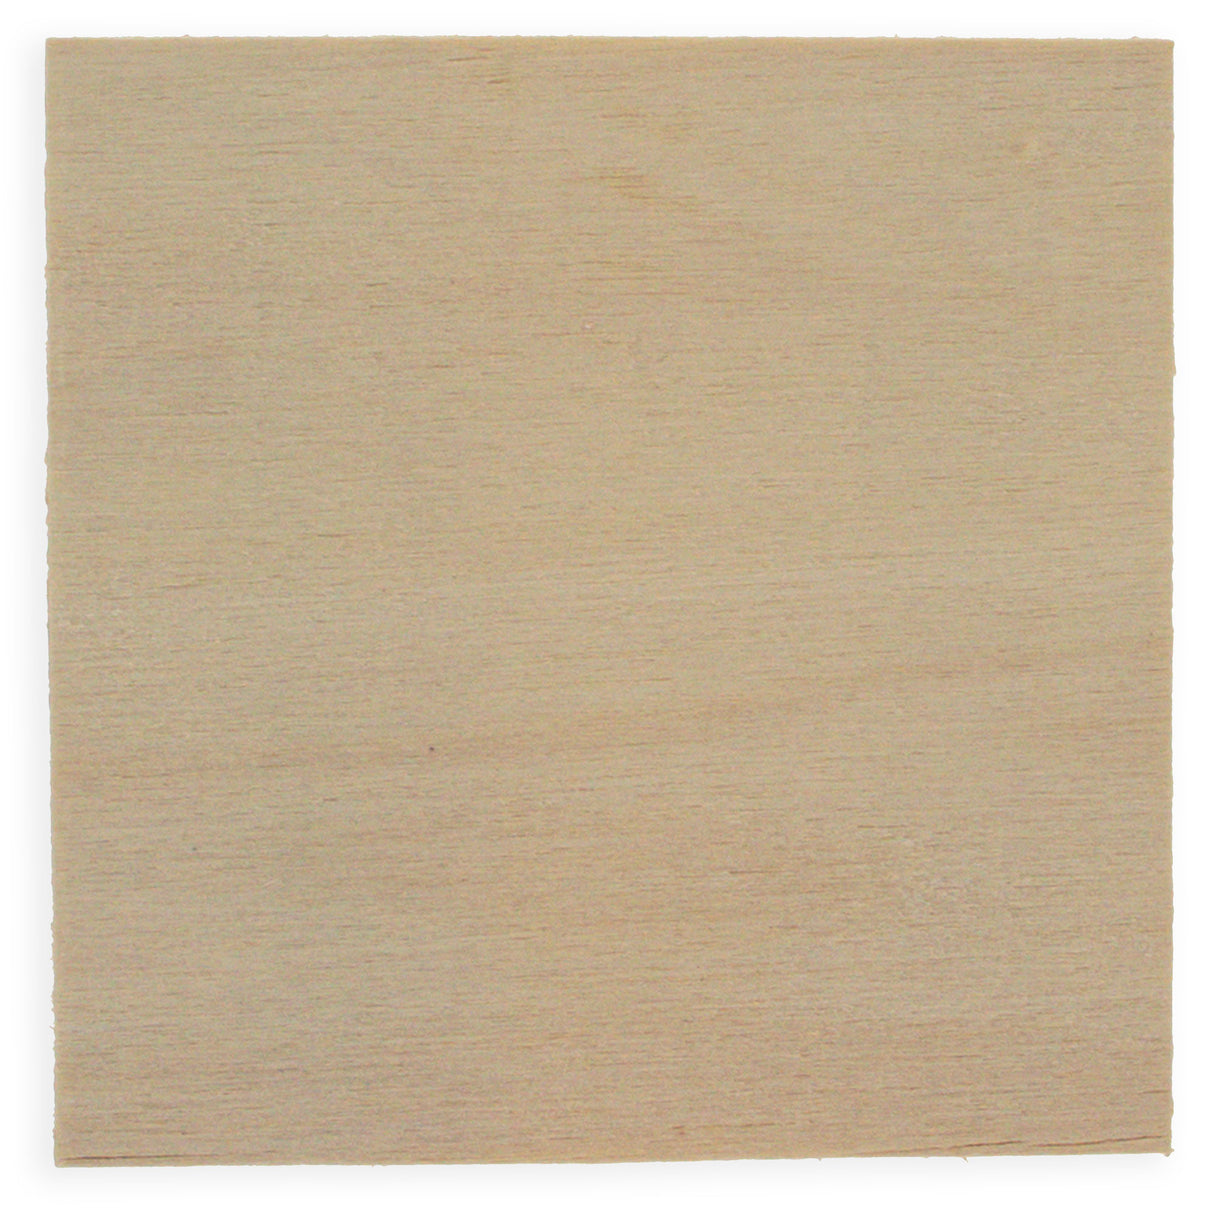 Square Wooden Plaque DIY Crafts Blanks Unfinished 2.9 Inches in Beige color, Square shape